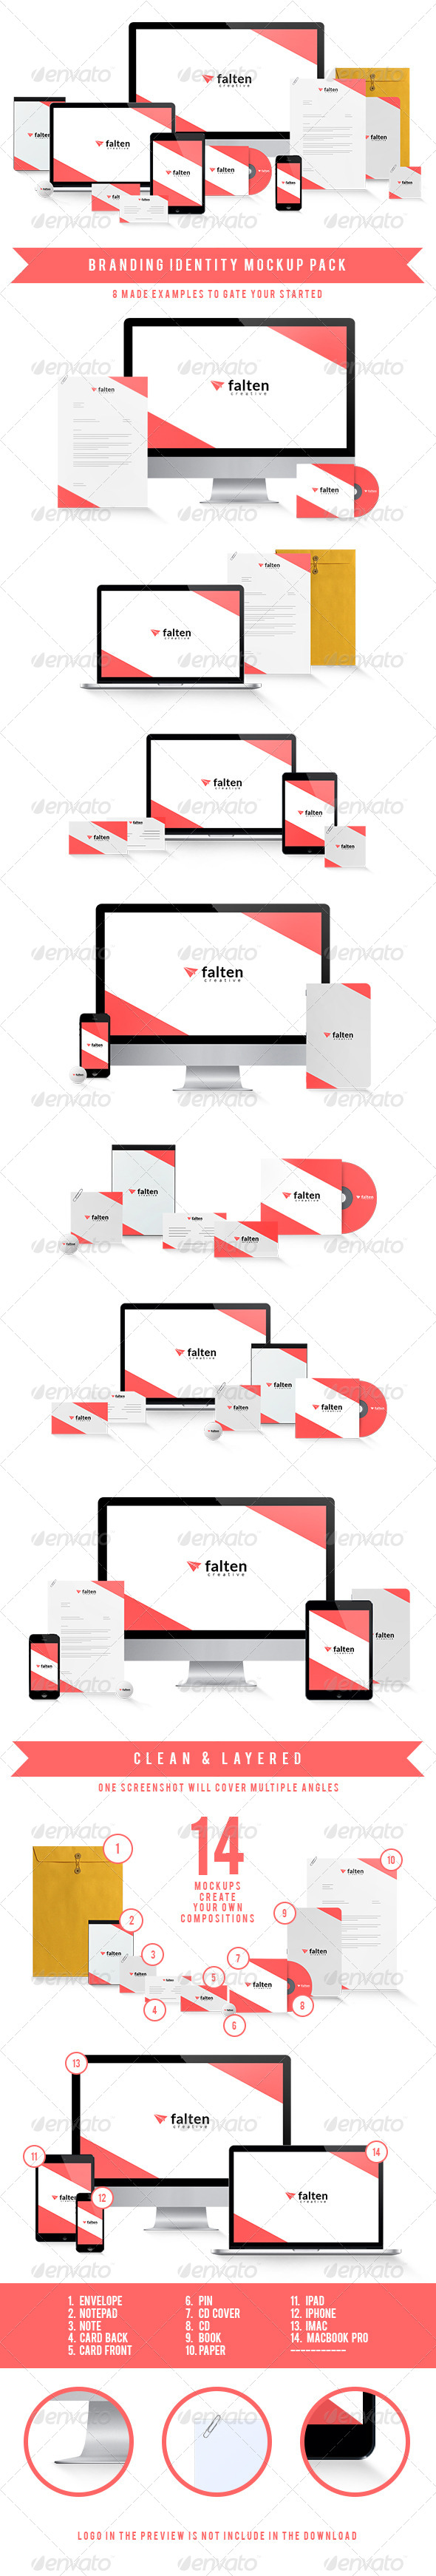 Download Branding Identity Mockup Pack by maulanacreative | GraphicRiver